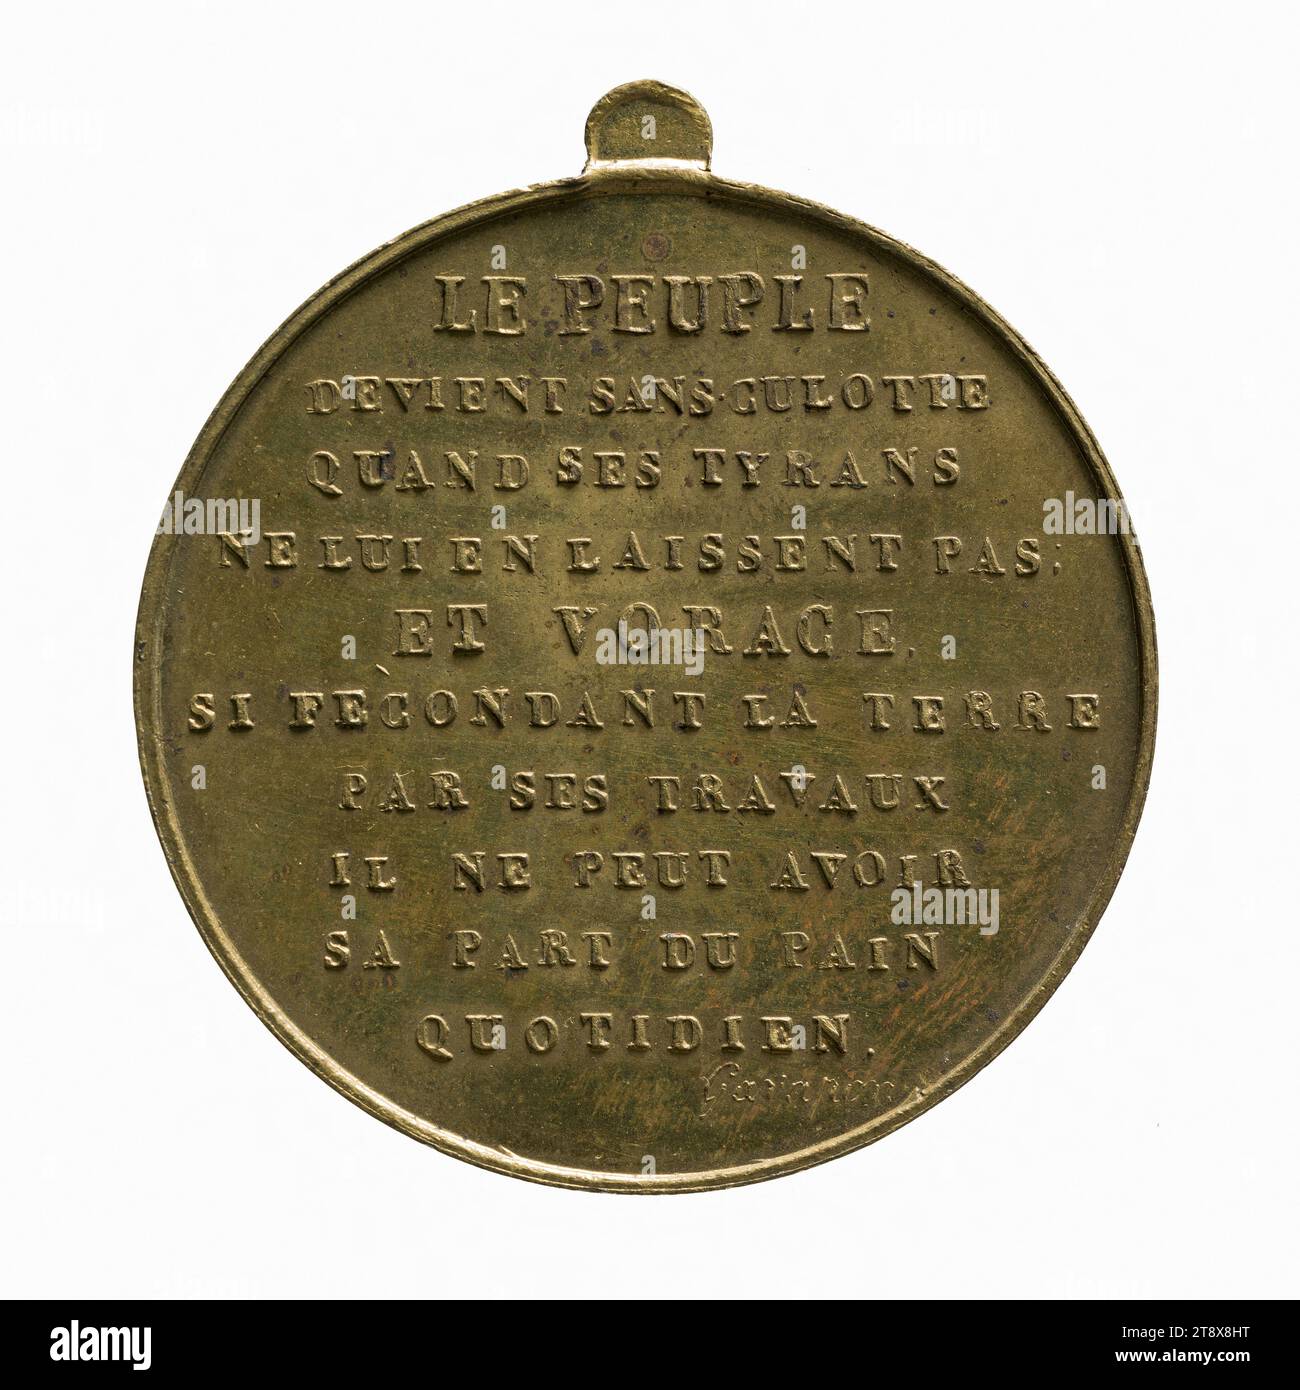 Homage of the people of Lyon to the people of Paris, April 16, 1848, Garapon, Engraver in medals, Array, Numismatics, Medal, Lyon, Dimensions - Work: Diameter: 3.6 cm, Weight (type dimension): 16.95 g Stock Photo